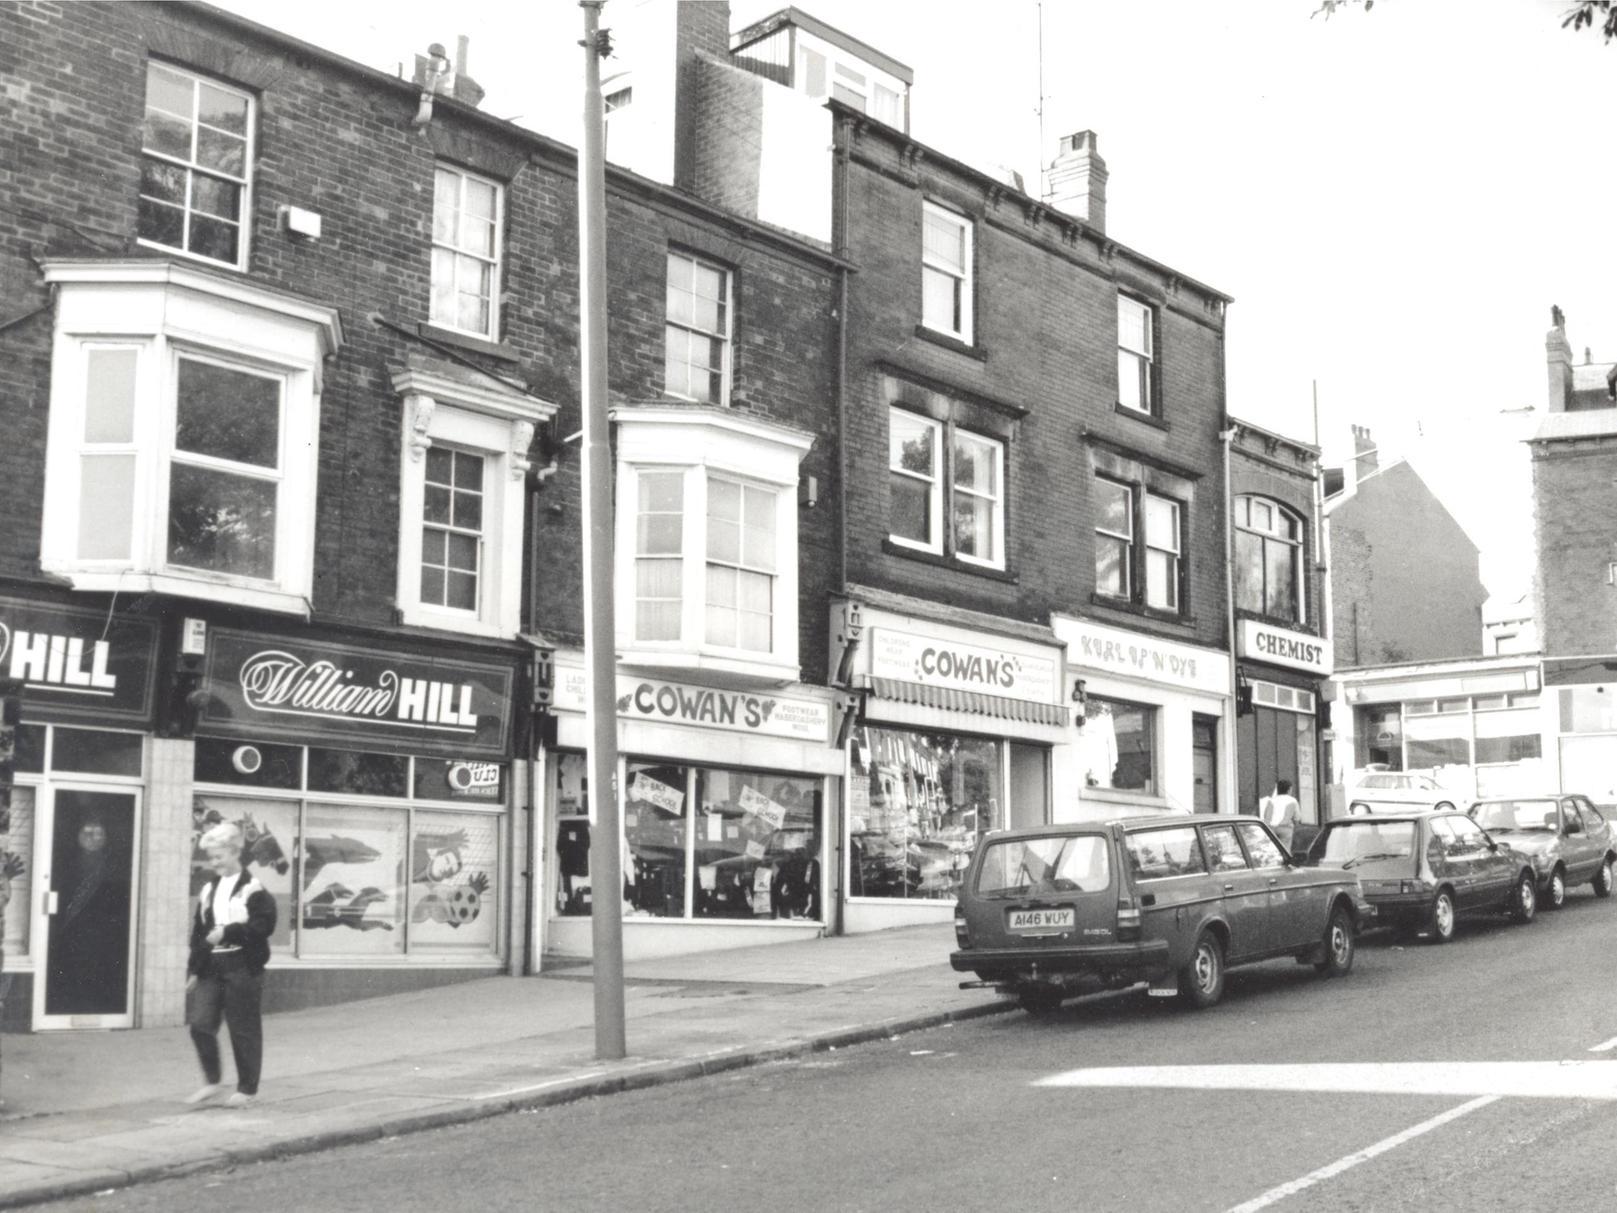 Share your memories of Beeston with Andrew Hutchinson via email at: andrew.hutchinson@jpress.co.uk or tweet him - @AndyHutchYPN